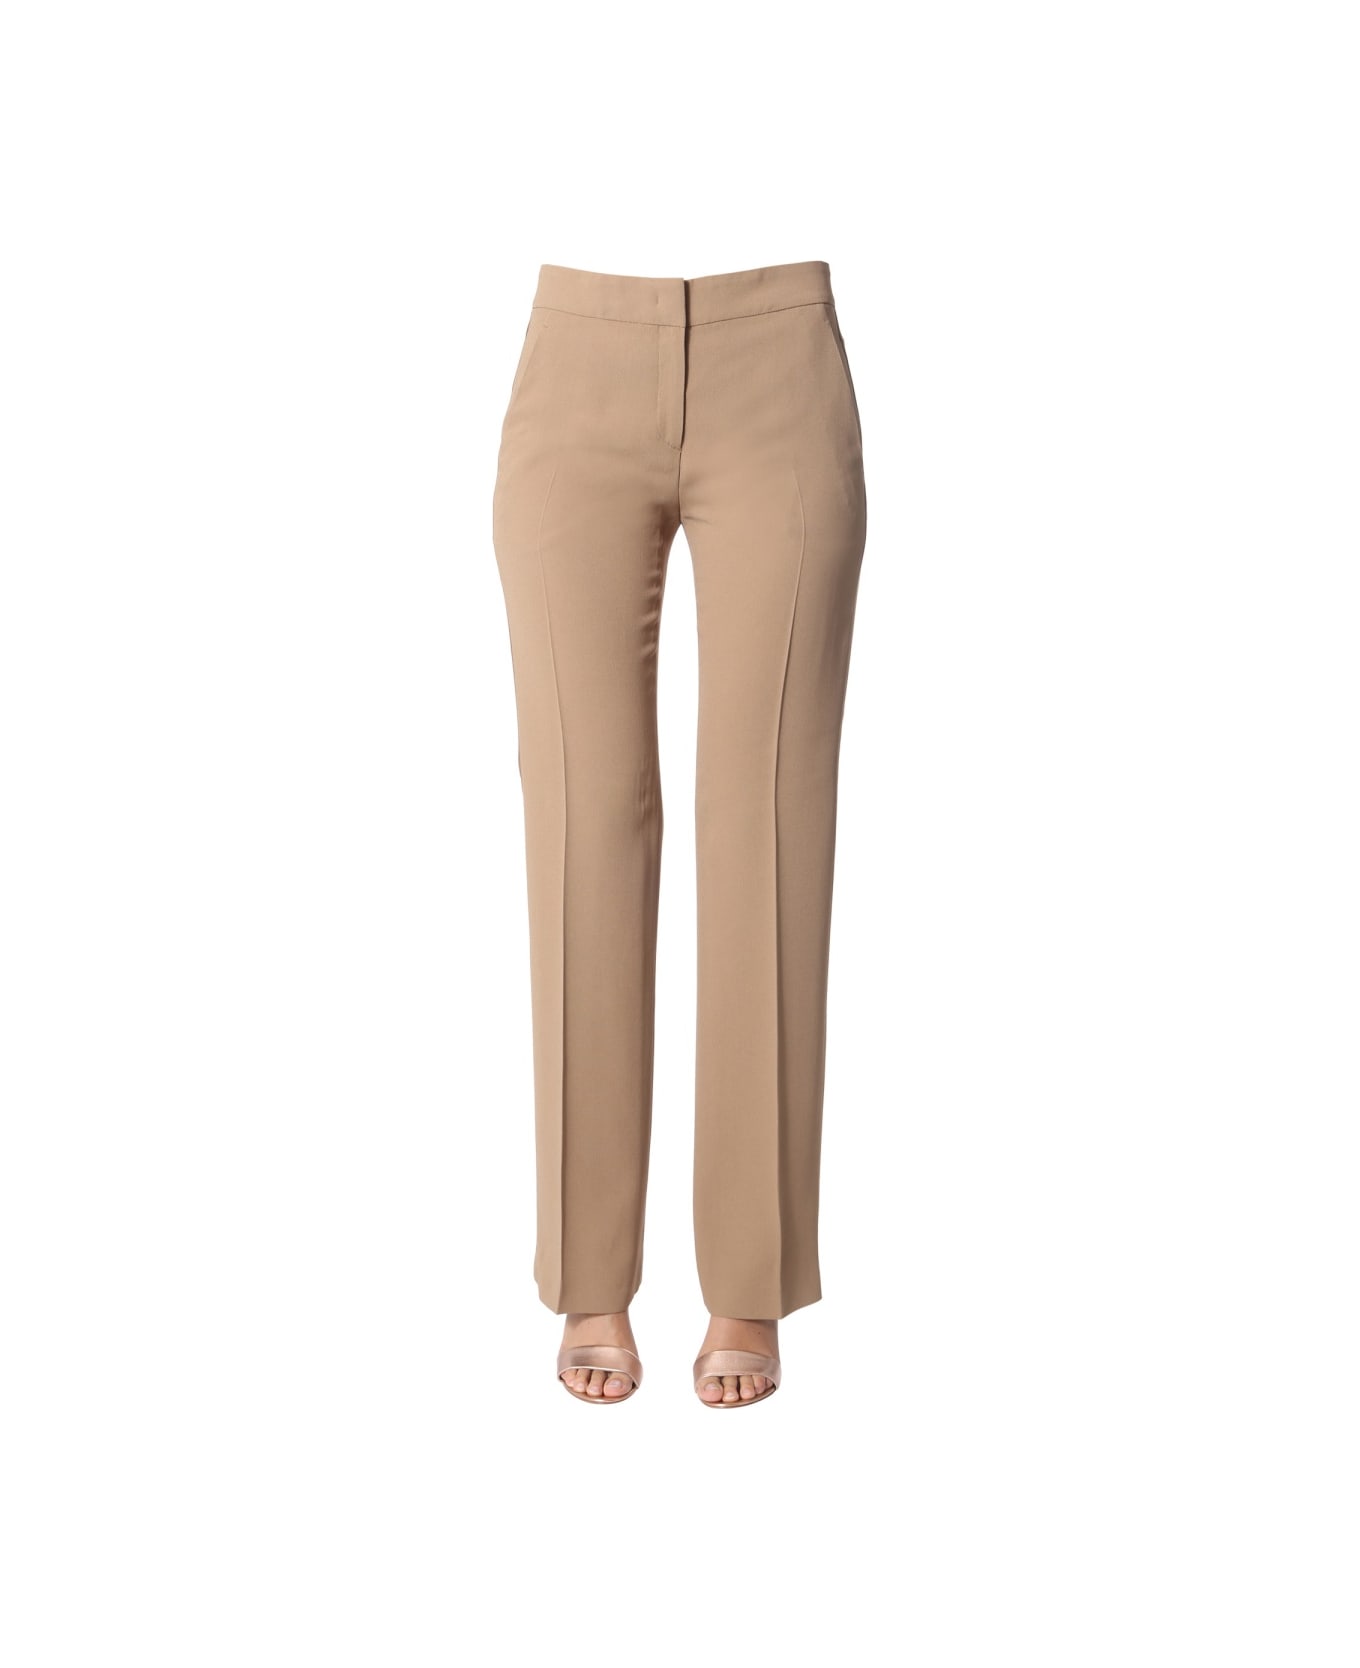 N.21 Pants With Side Band - BEIGE